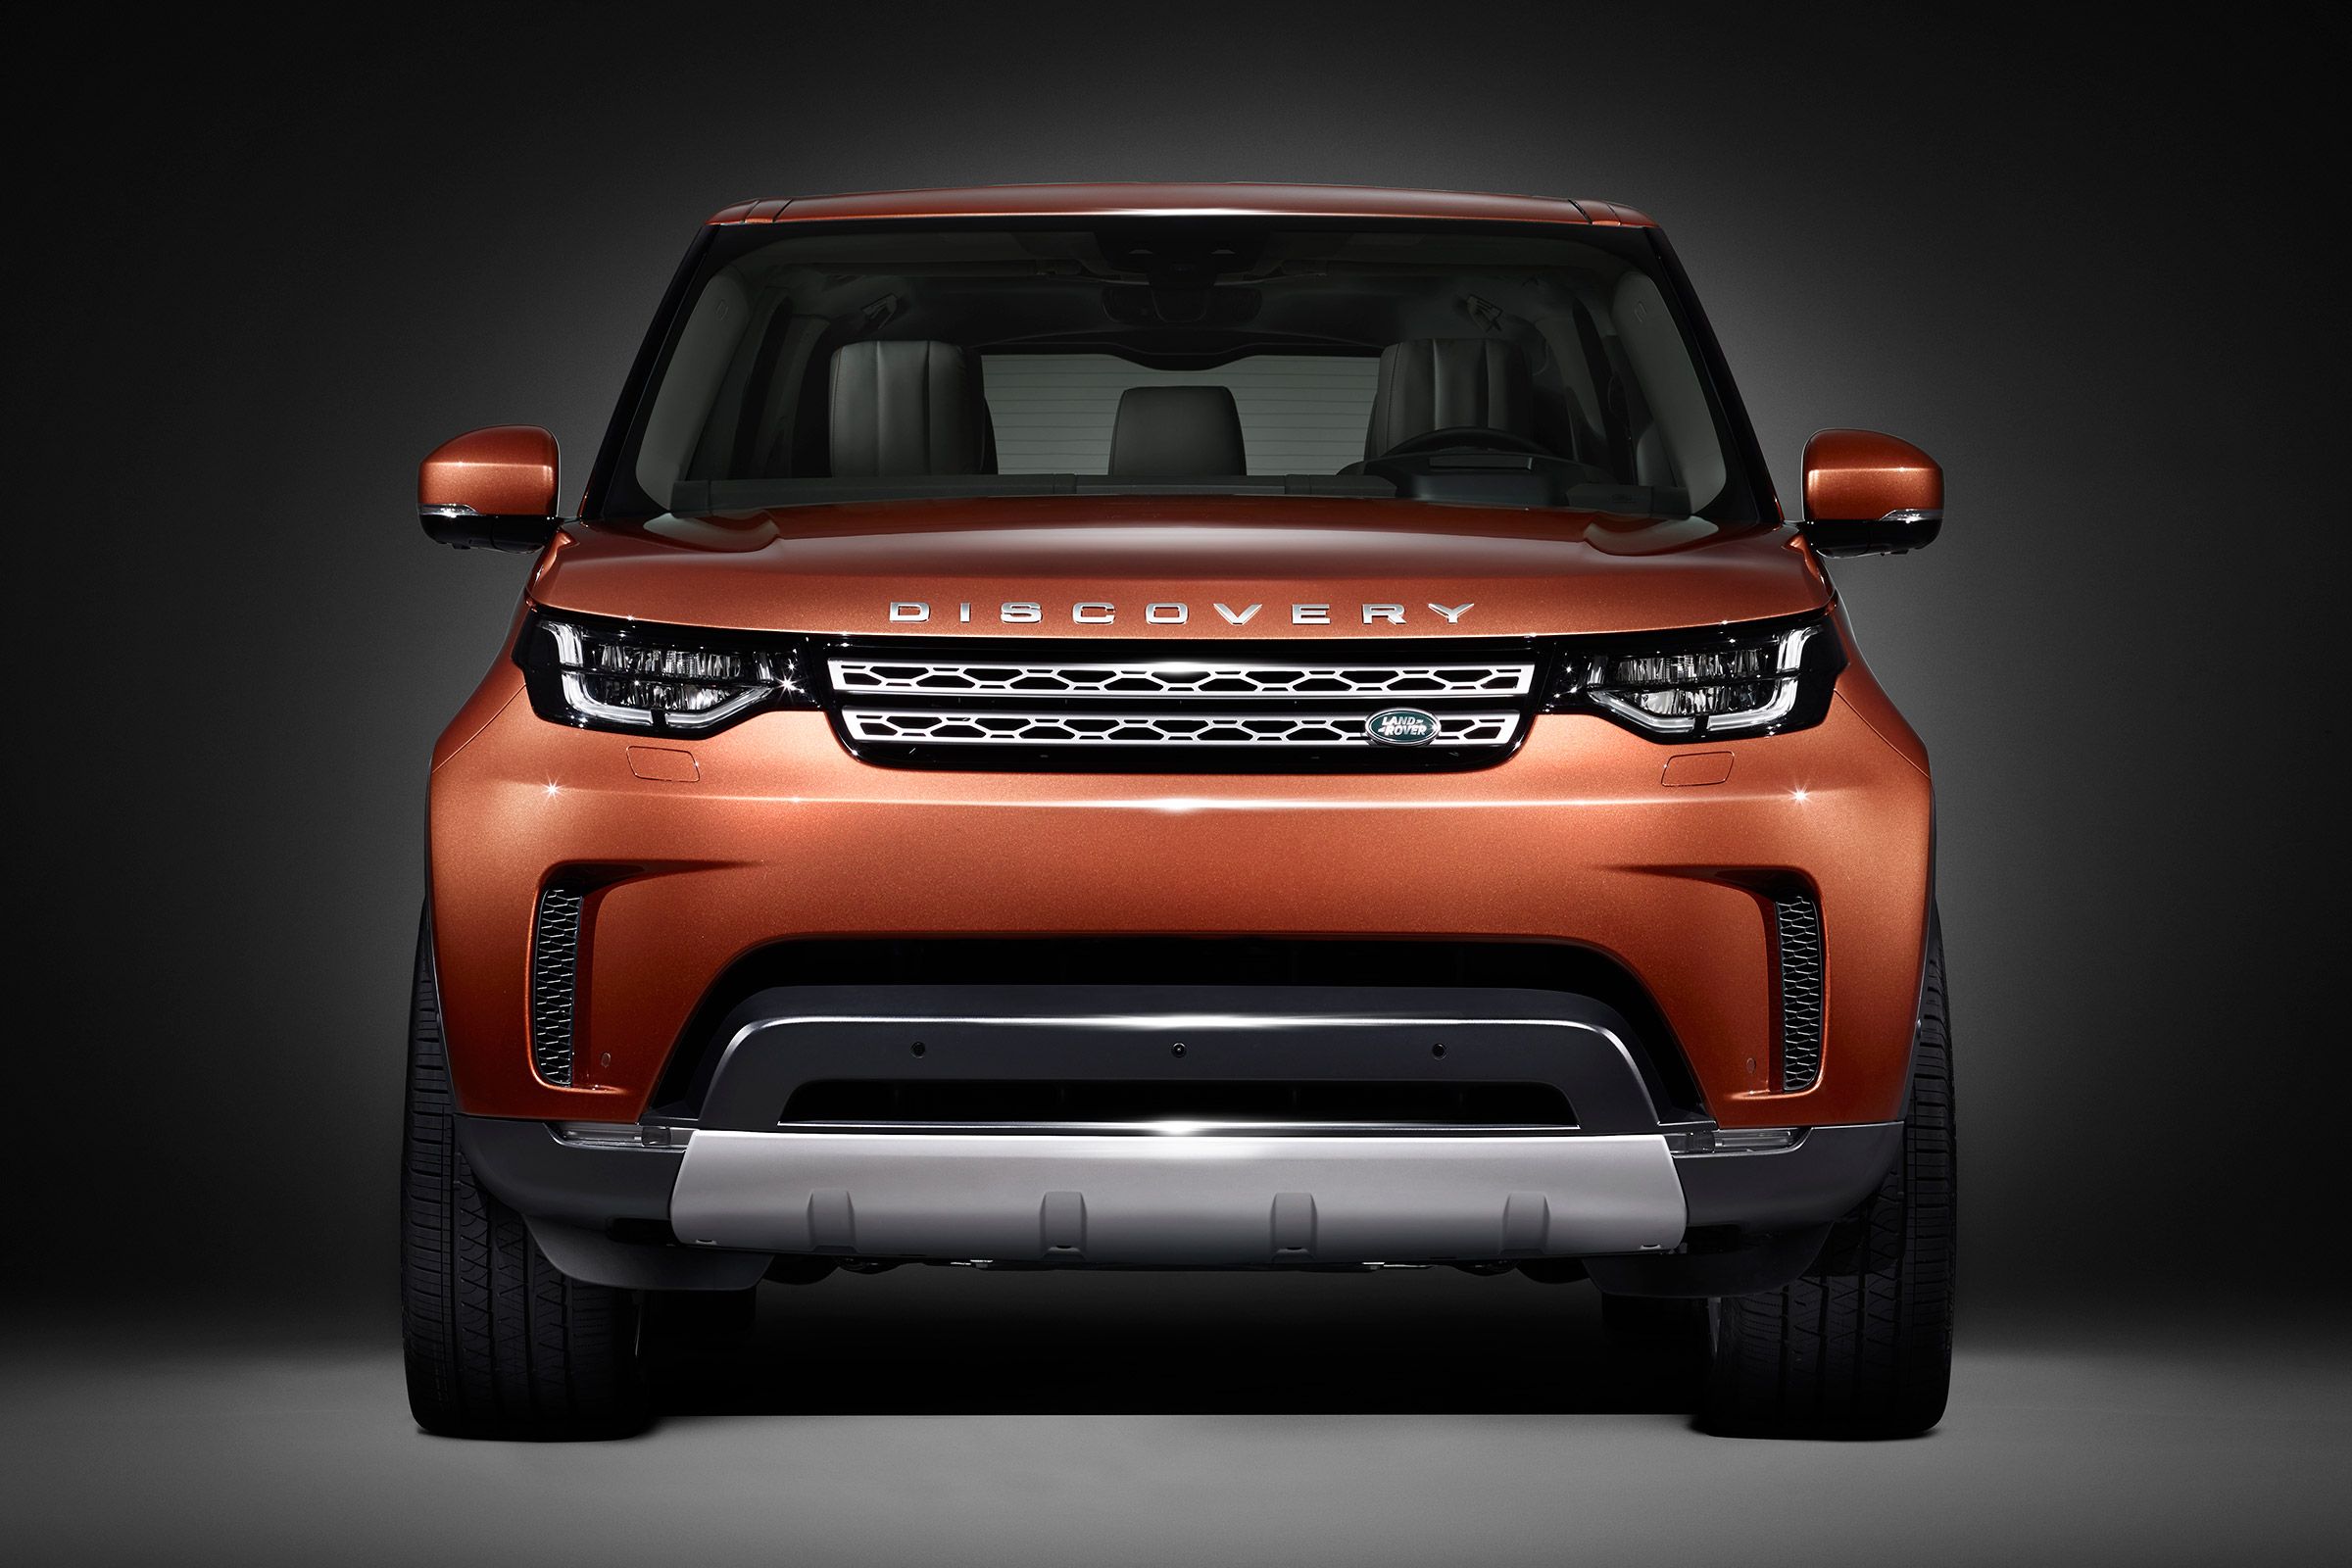 New Land Rover Discovery HD Cars, 4k Wallpaper, Image